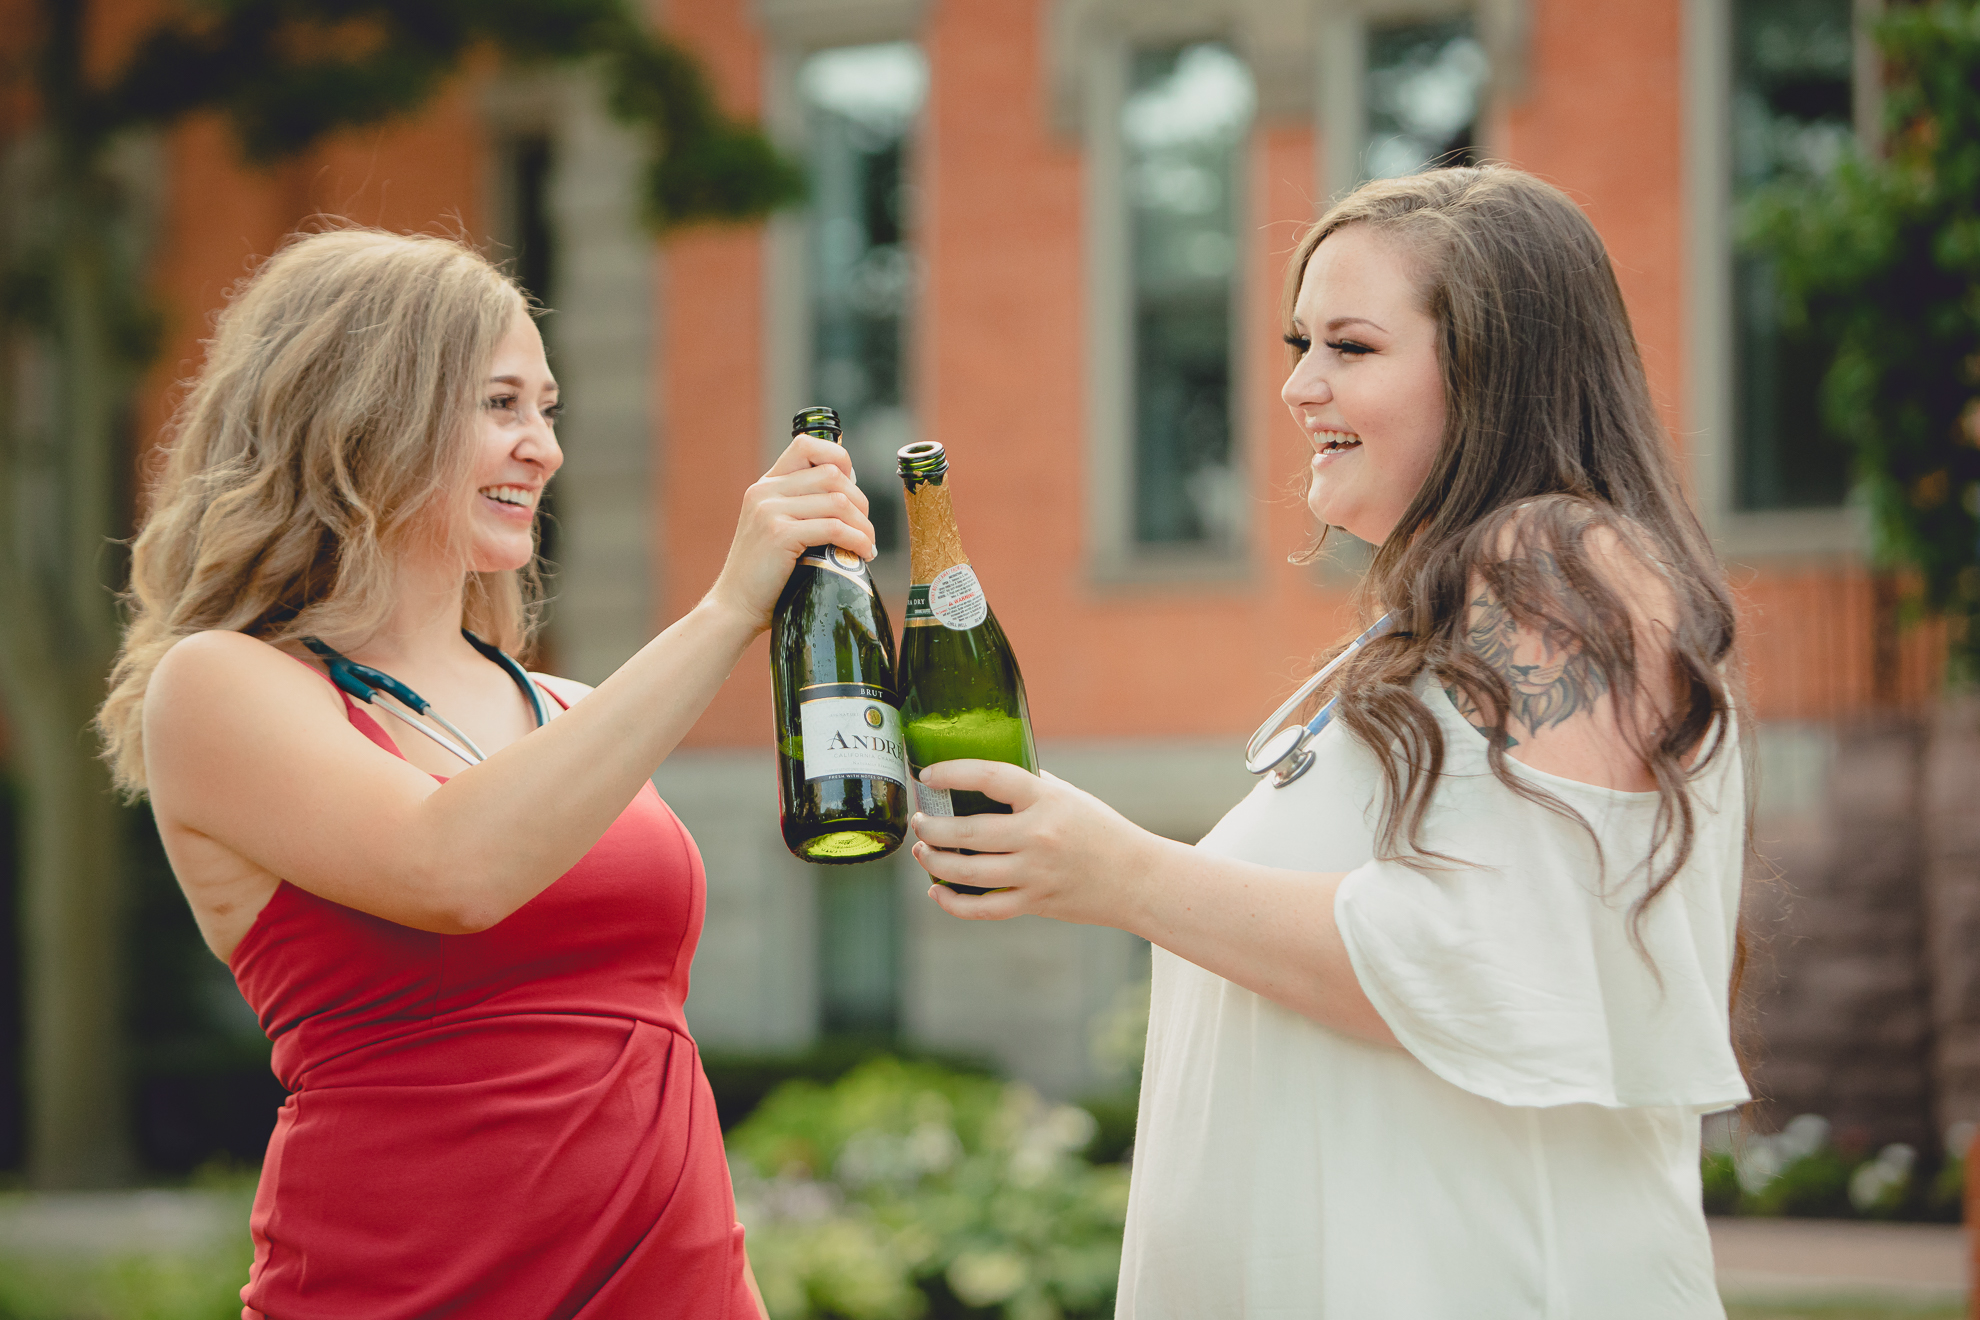 D'youville nursing students toast champagne during senior graduation portrait photography session in Buffalo, NY